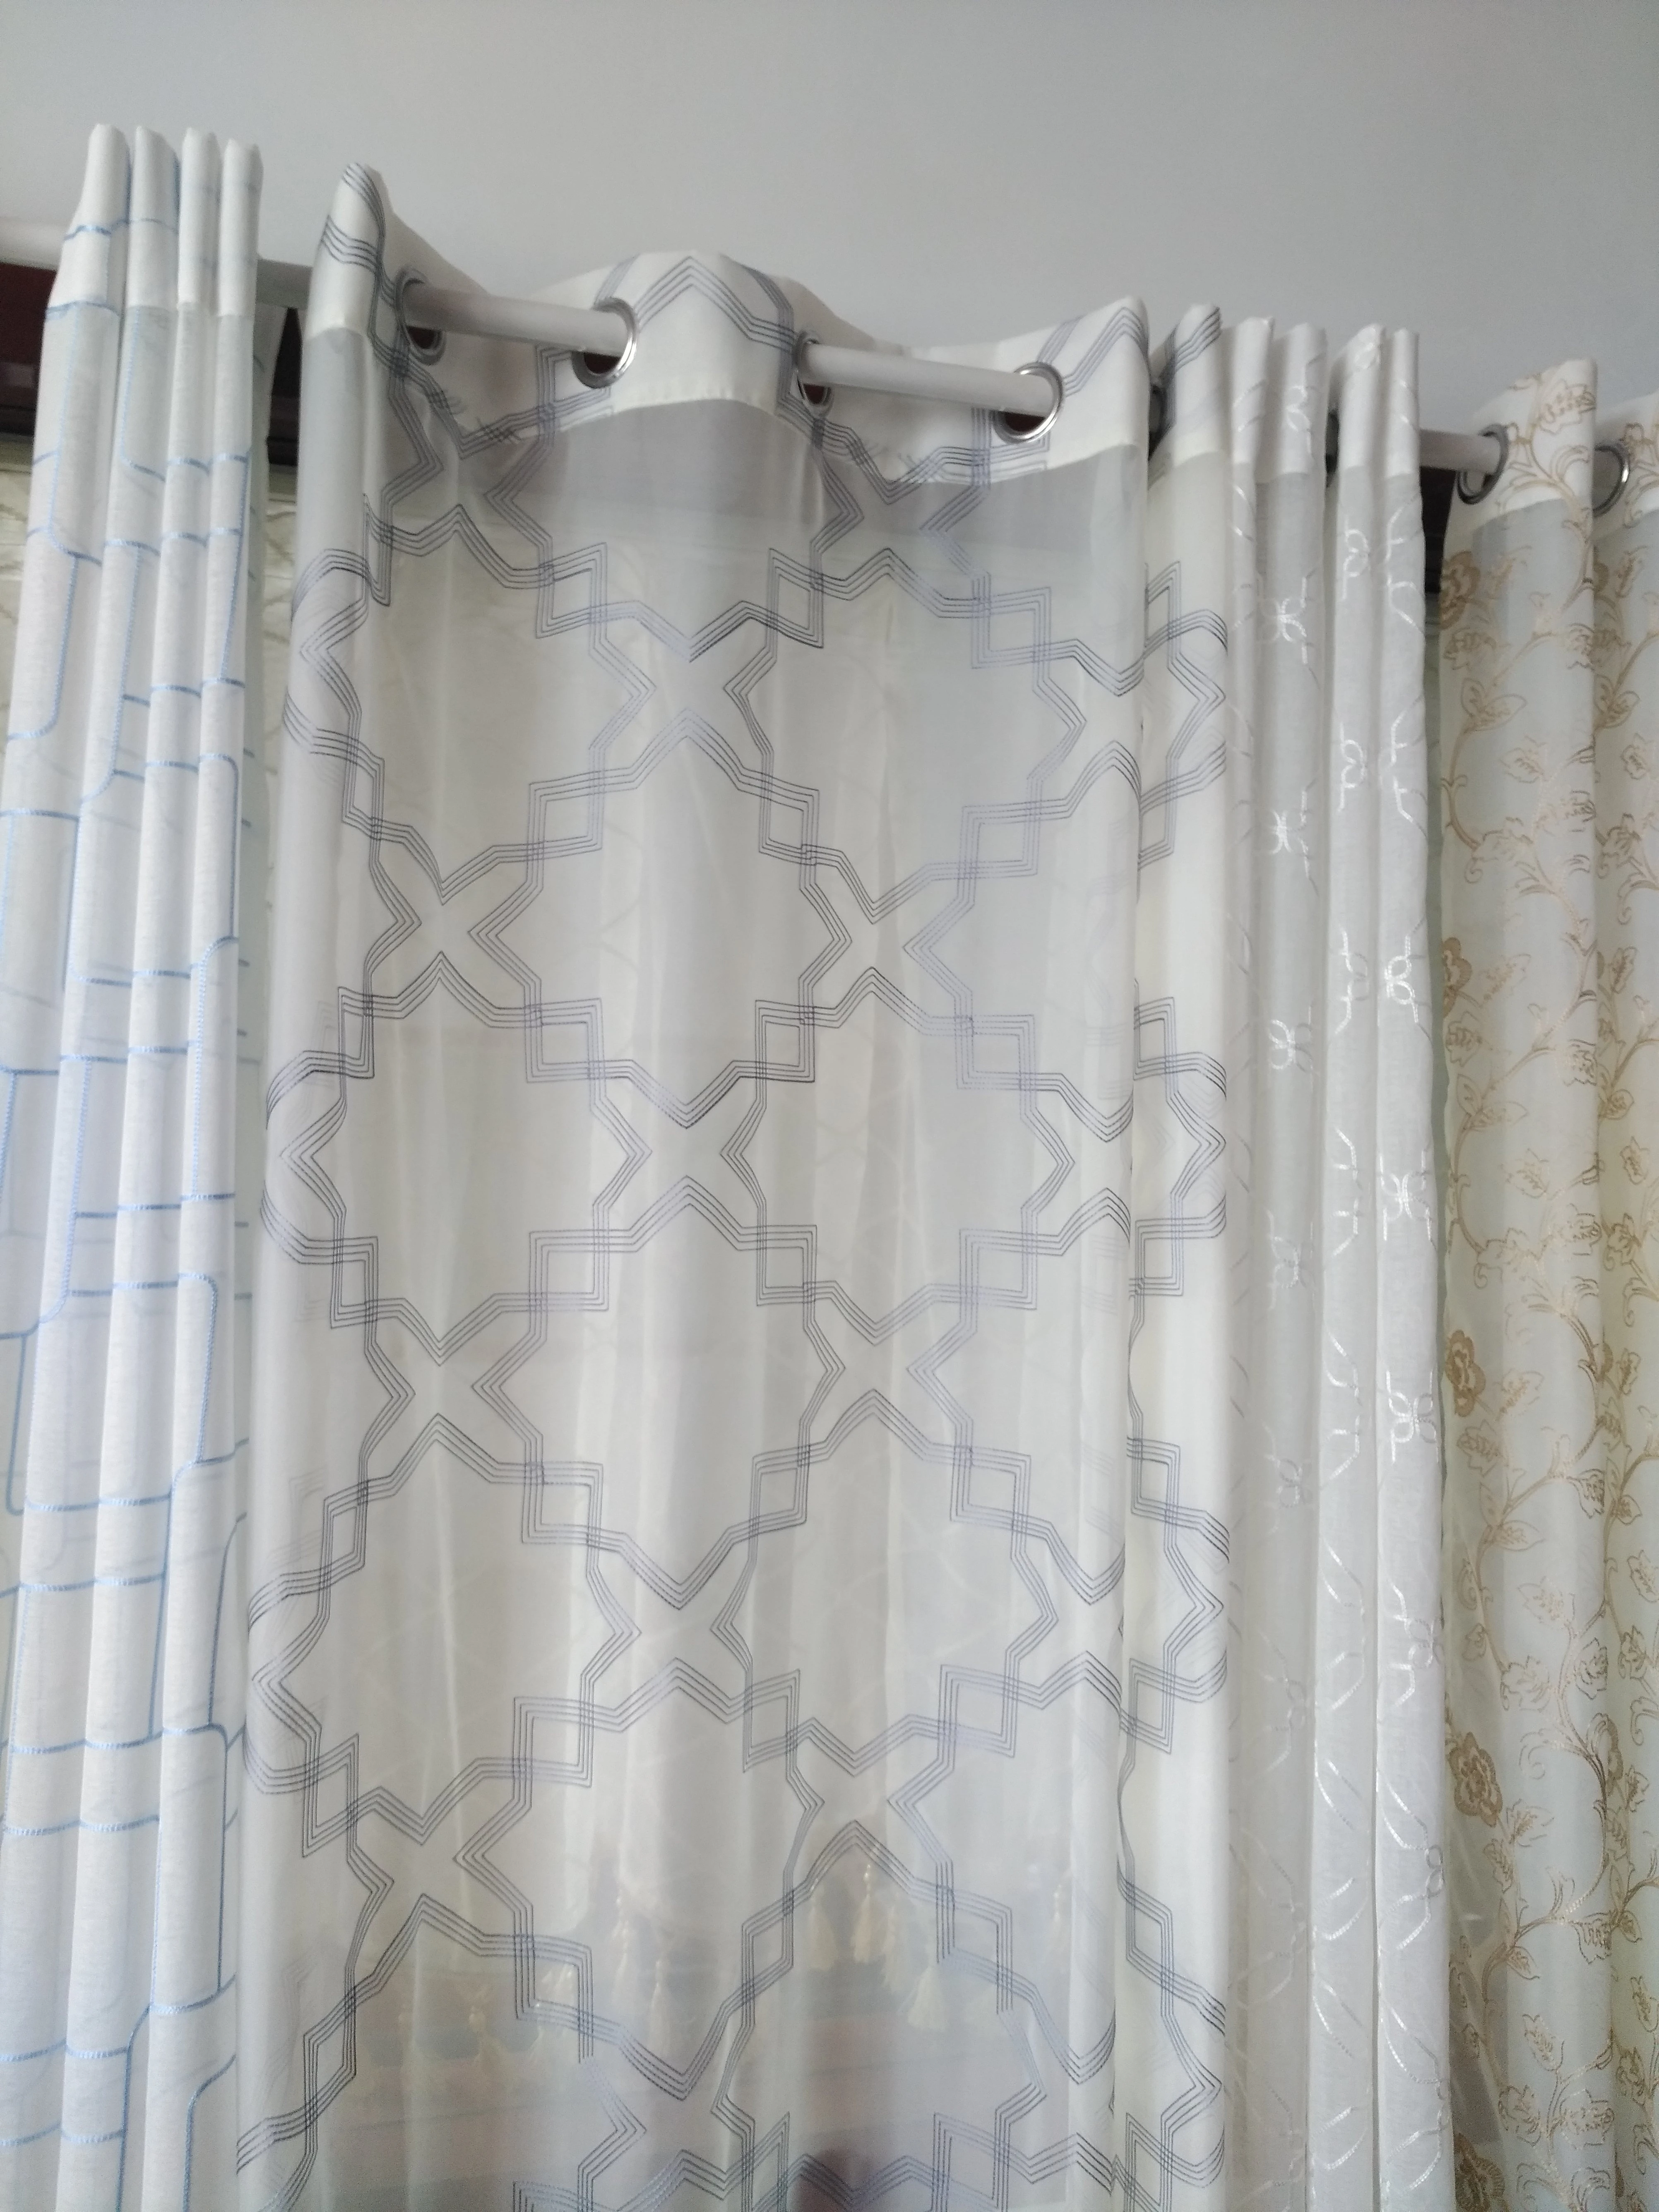 HOT SALE  Embroidery Semi Sheer Curtains Faux Linen Grommet Curtains for Bedroom 52 x 63 Inch 2 Panels, grey